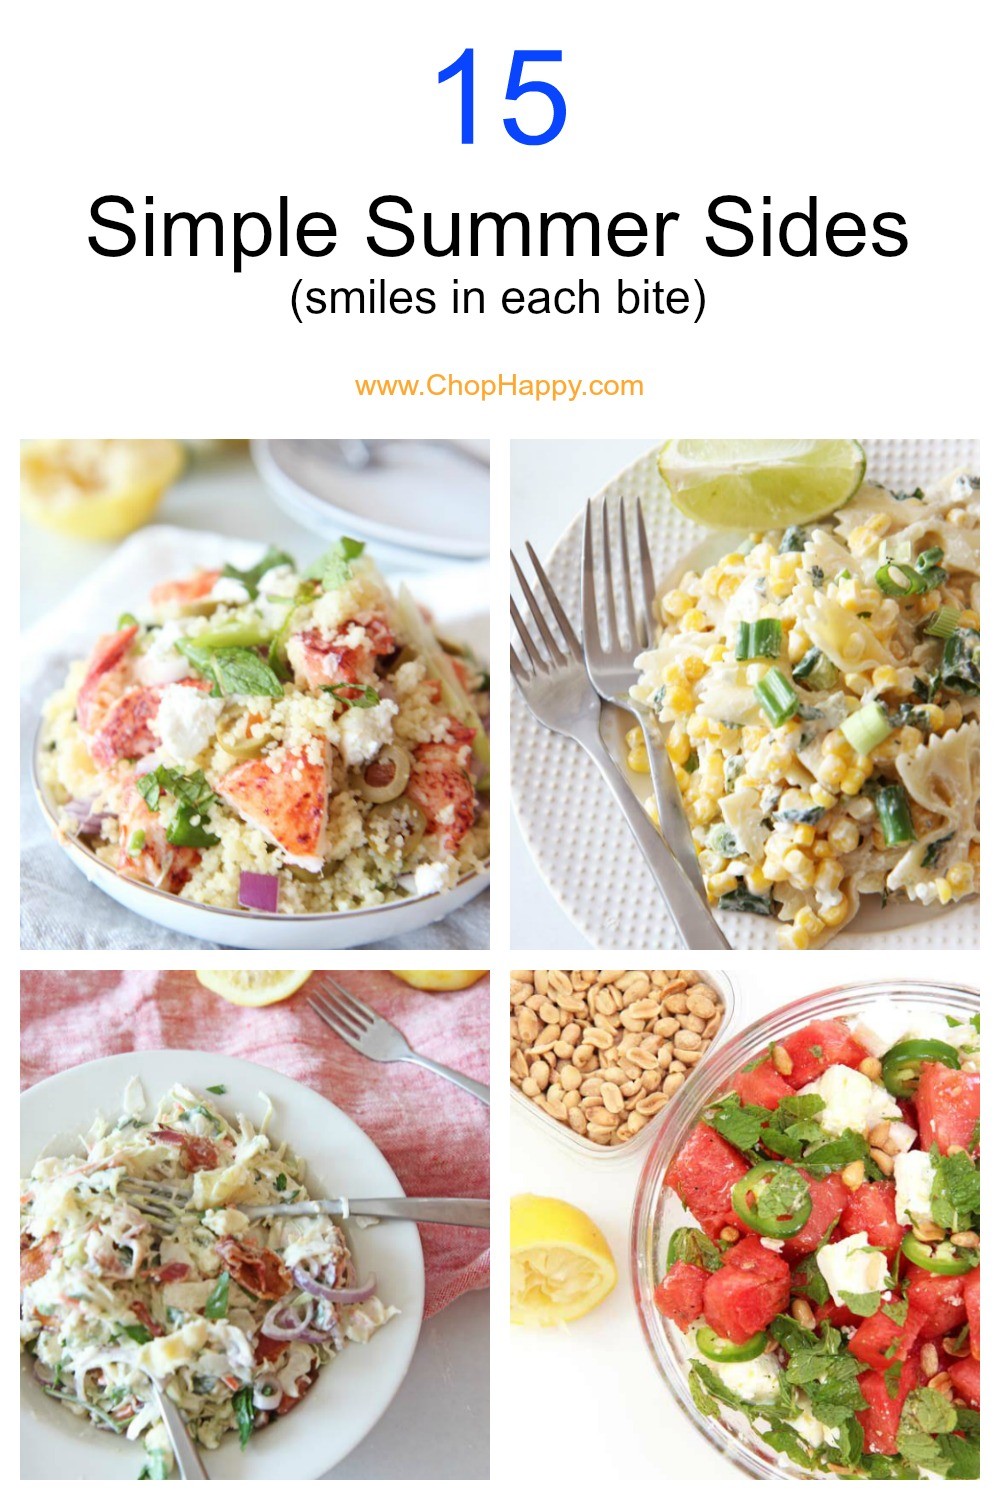 Hot sun, cold drinks, and easy summer sides! This is my idea of a relaxing fun day in the summer sun! Pasta salad, potato salad, coleslaw, corn salad and other fun summer eats recipes. Happy Summer eating! #summerrecipes #potatosalad